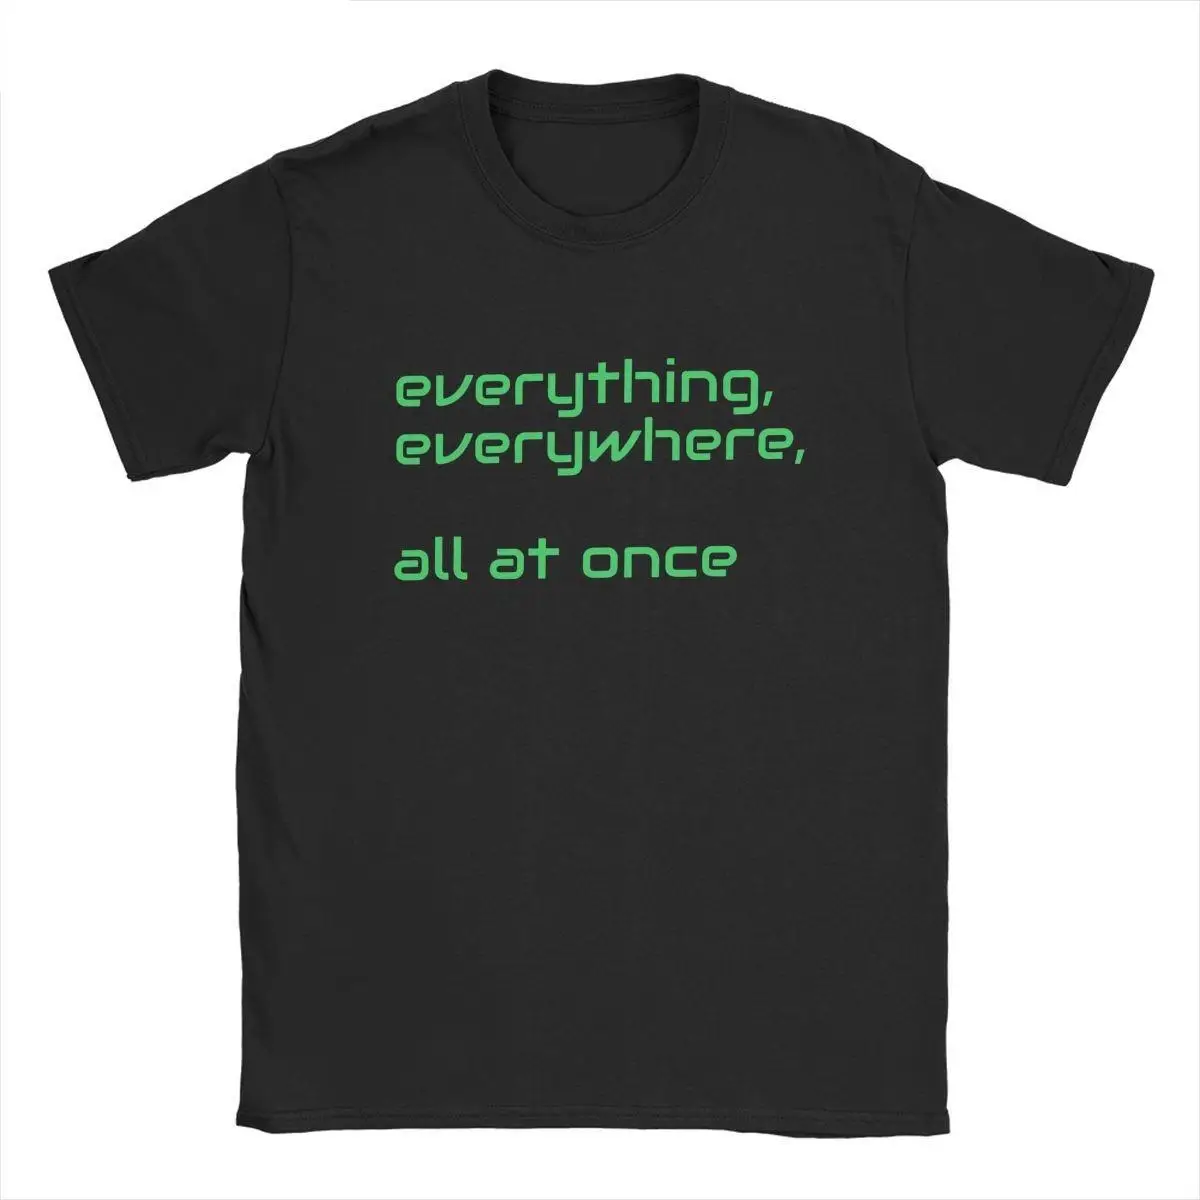 Humorous Everything Everywhere All At Once T-Shirts for Men Crewneck 100% Cotton T Shirts Short Sleeve Tee Shirt Plus Size Tops